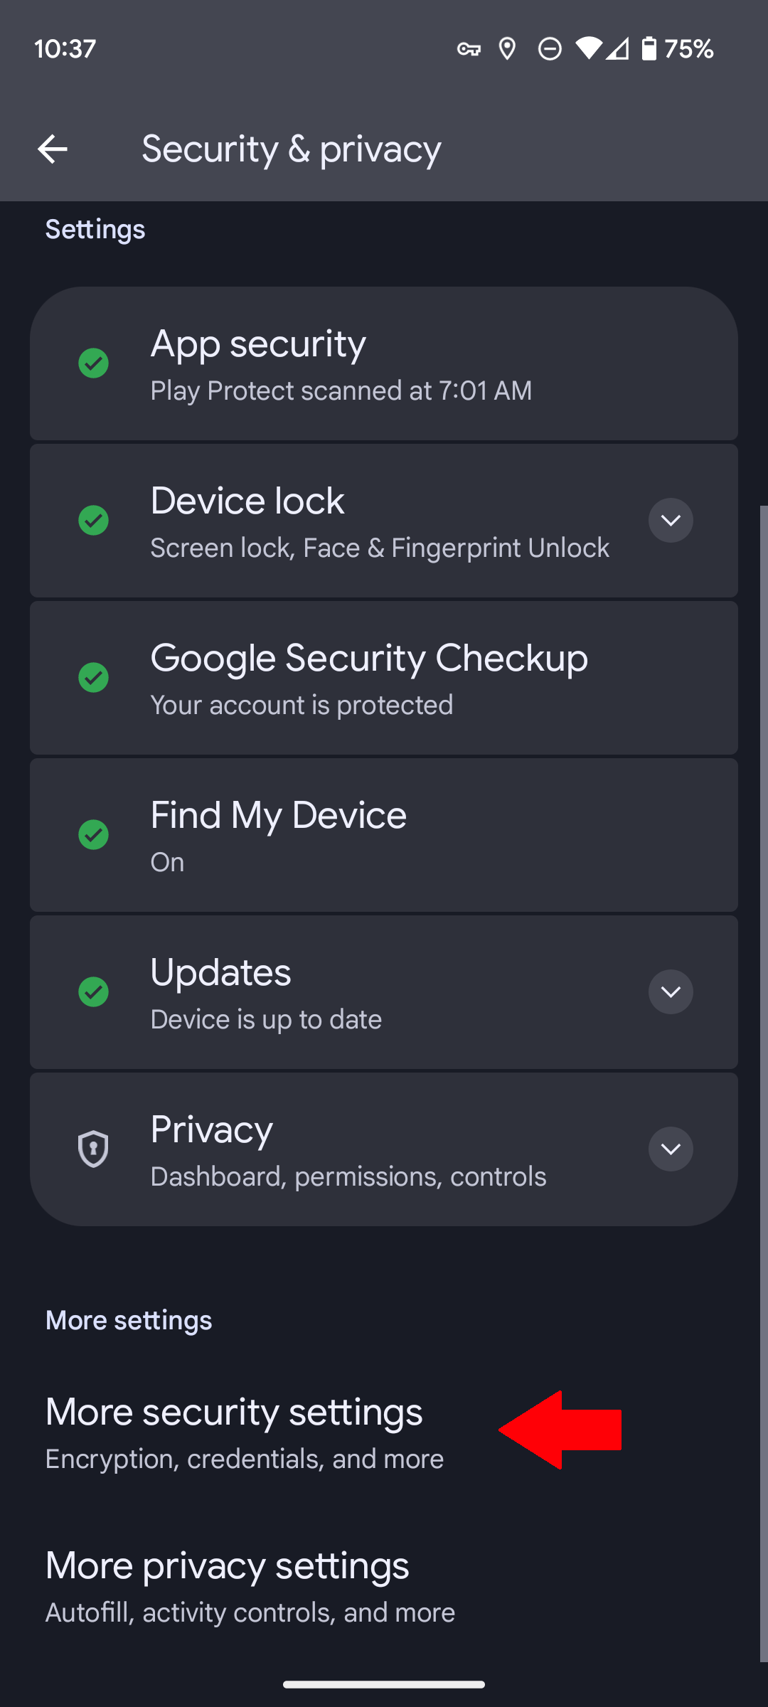 Security & Privacy settings on a Google Pixel phone with a red arrow pointing to the More security settings option